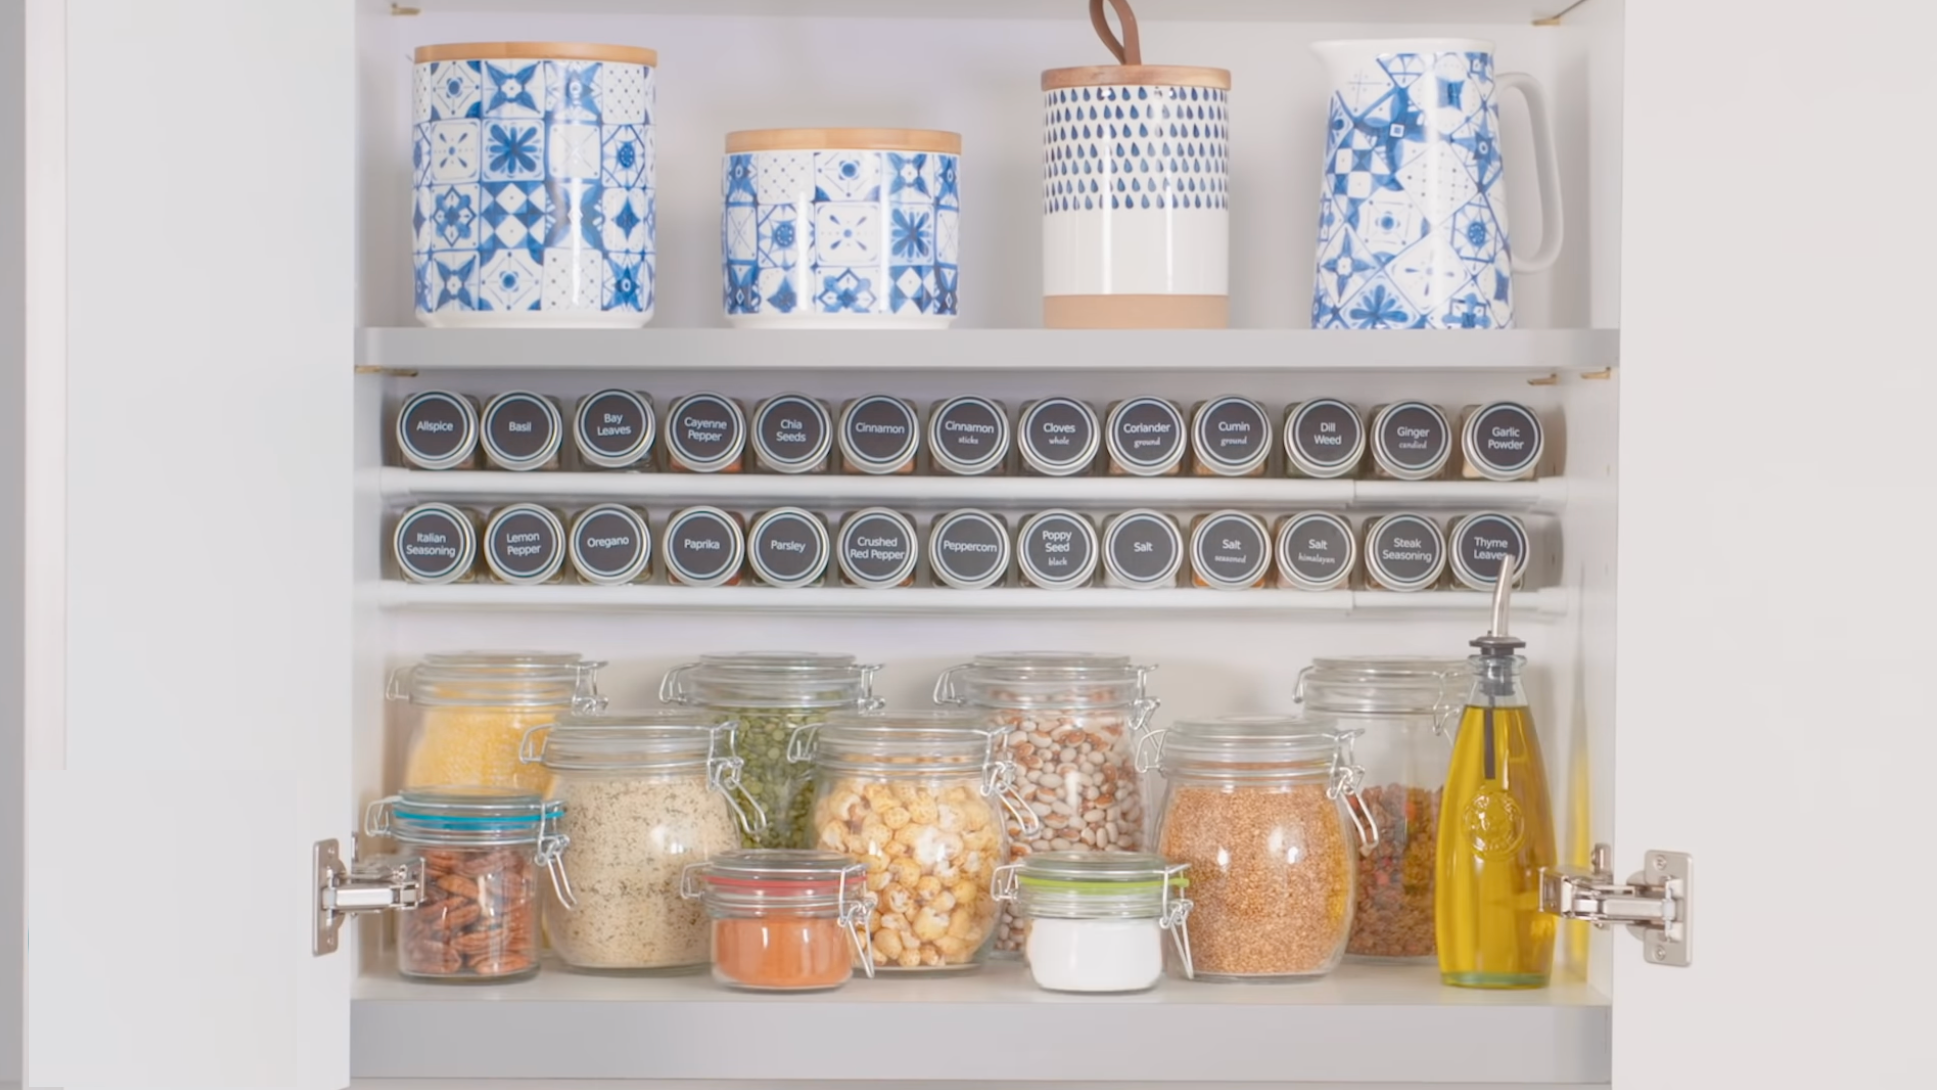 11 Creative Ways to Organise Your Home With Tension Rods